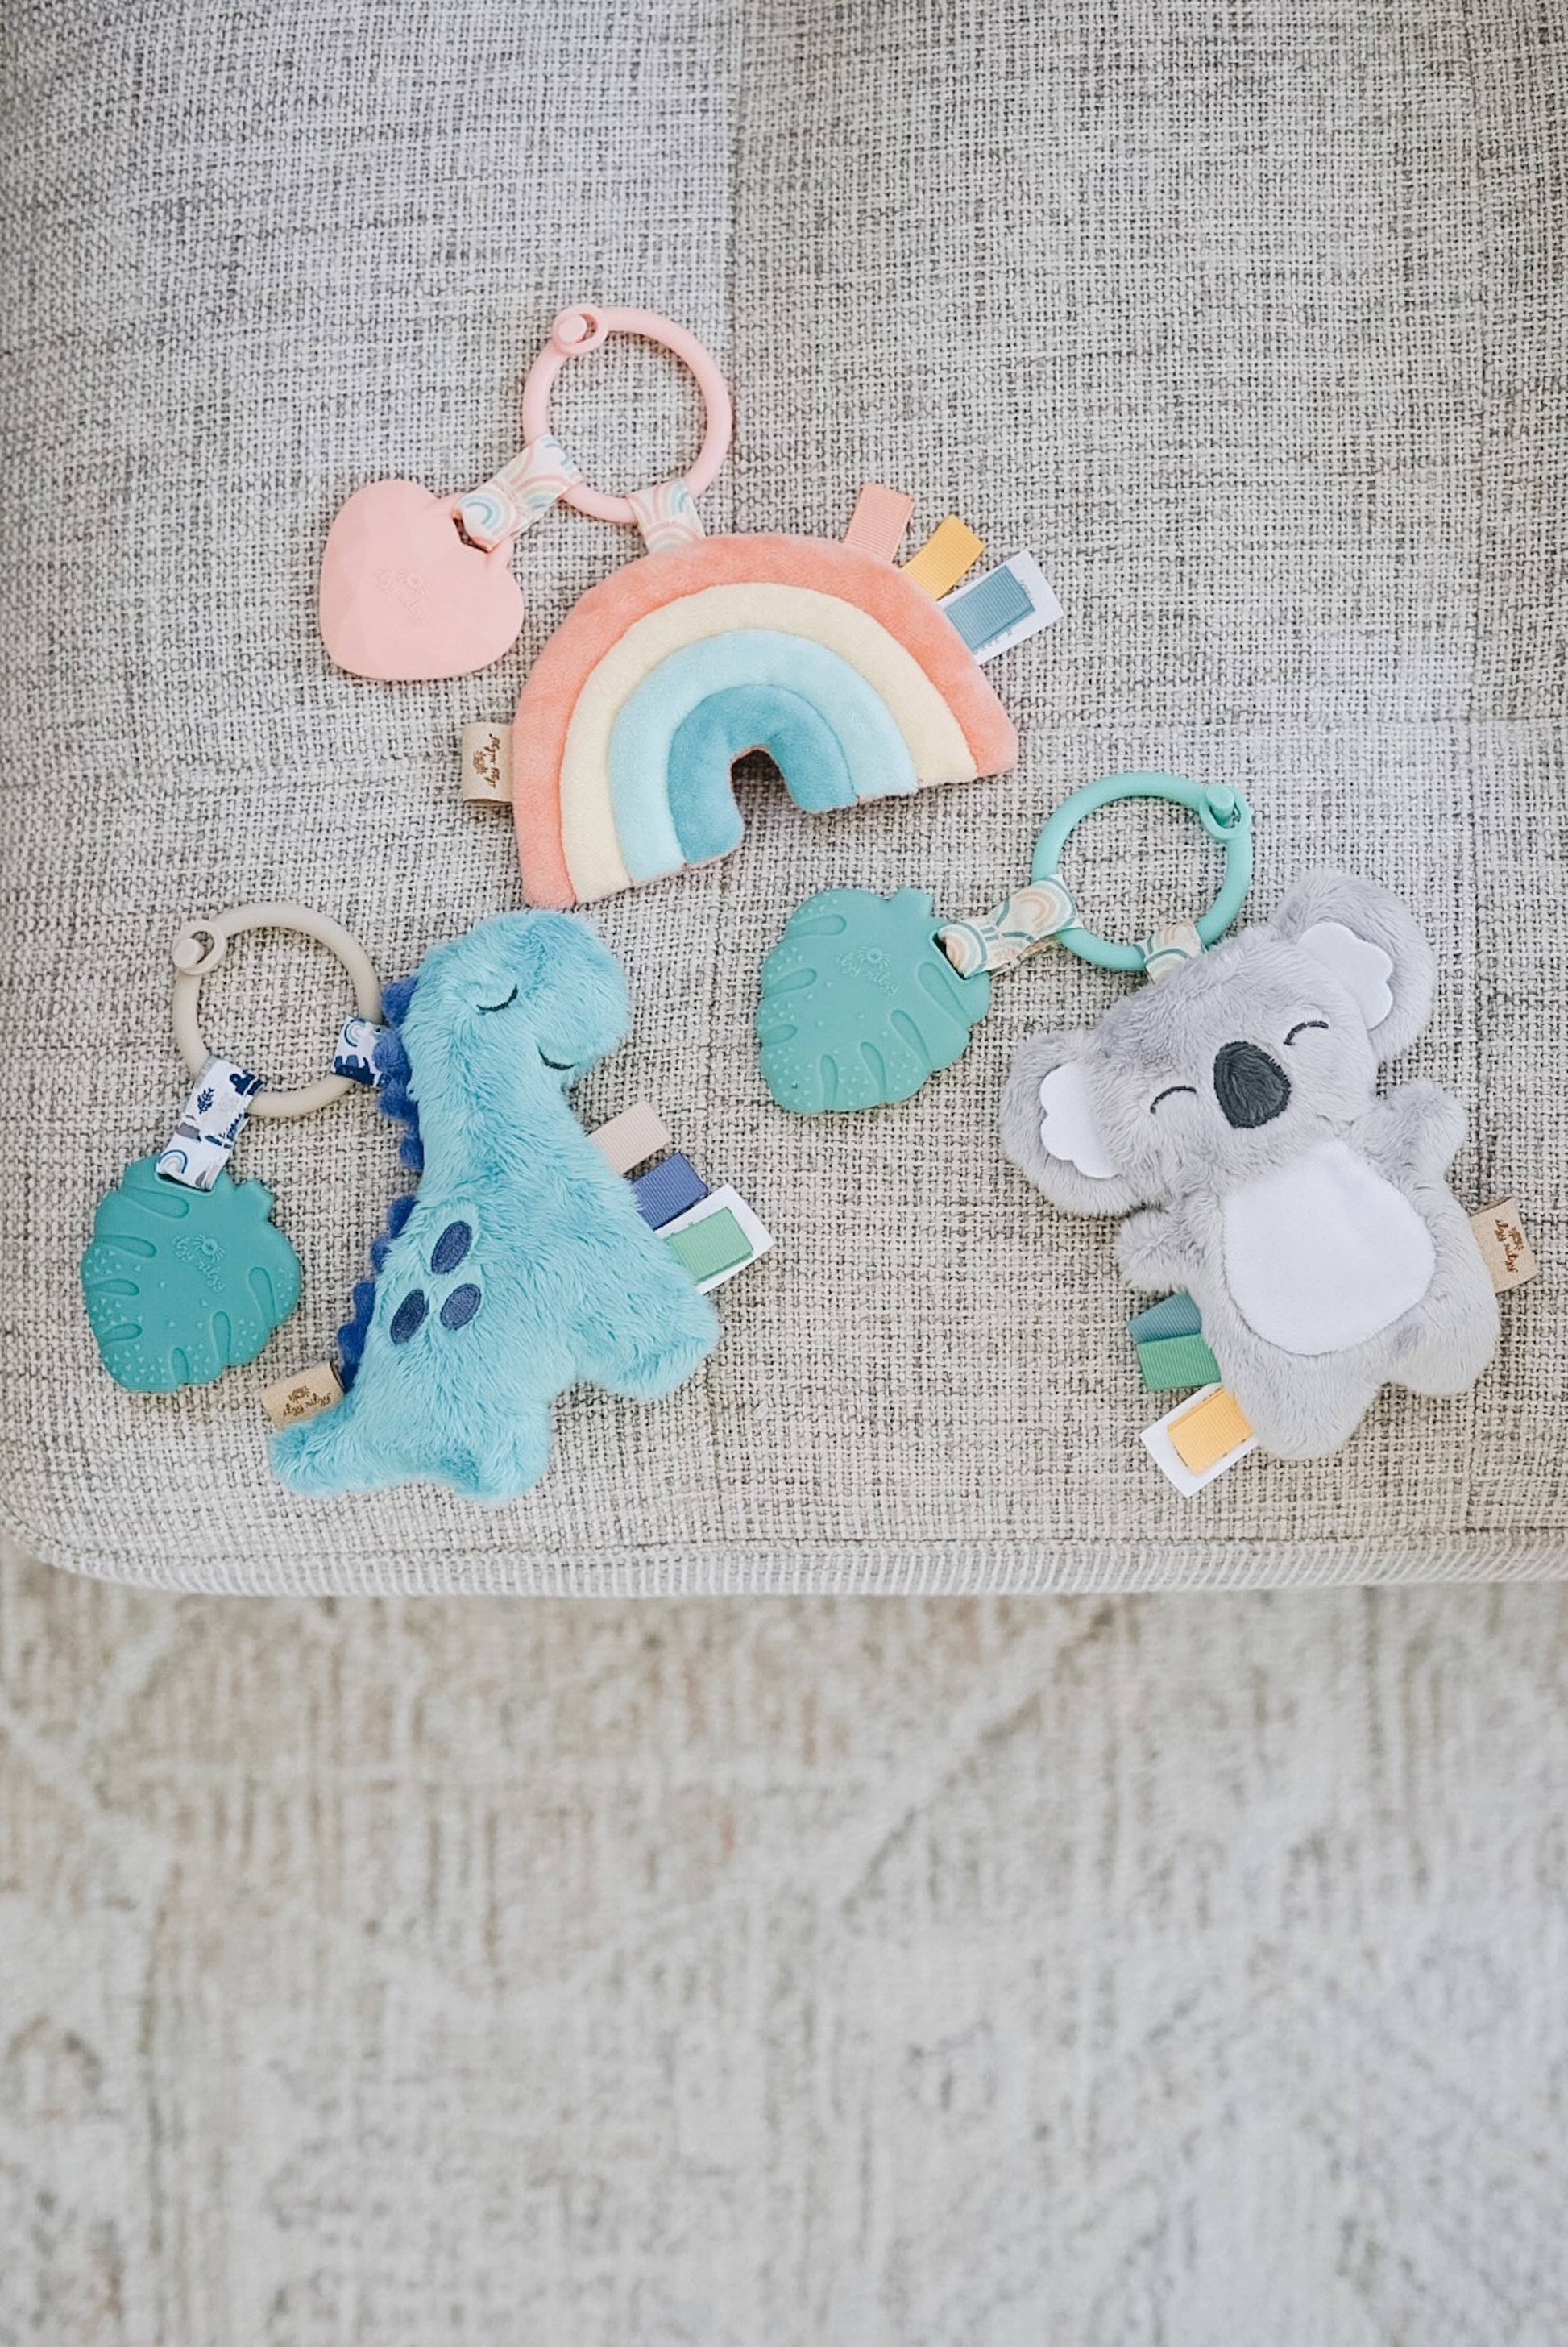 Coming Soon | Itzy Pal™ Plush + Teether - Pink & Blue Kidz Clothing